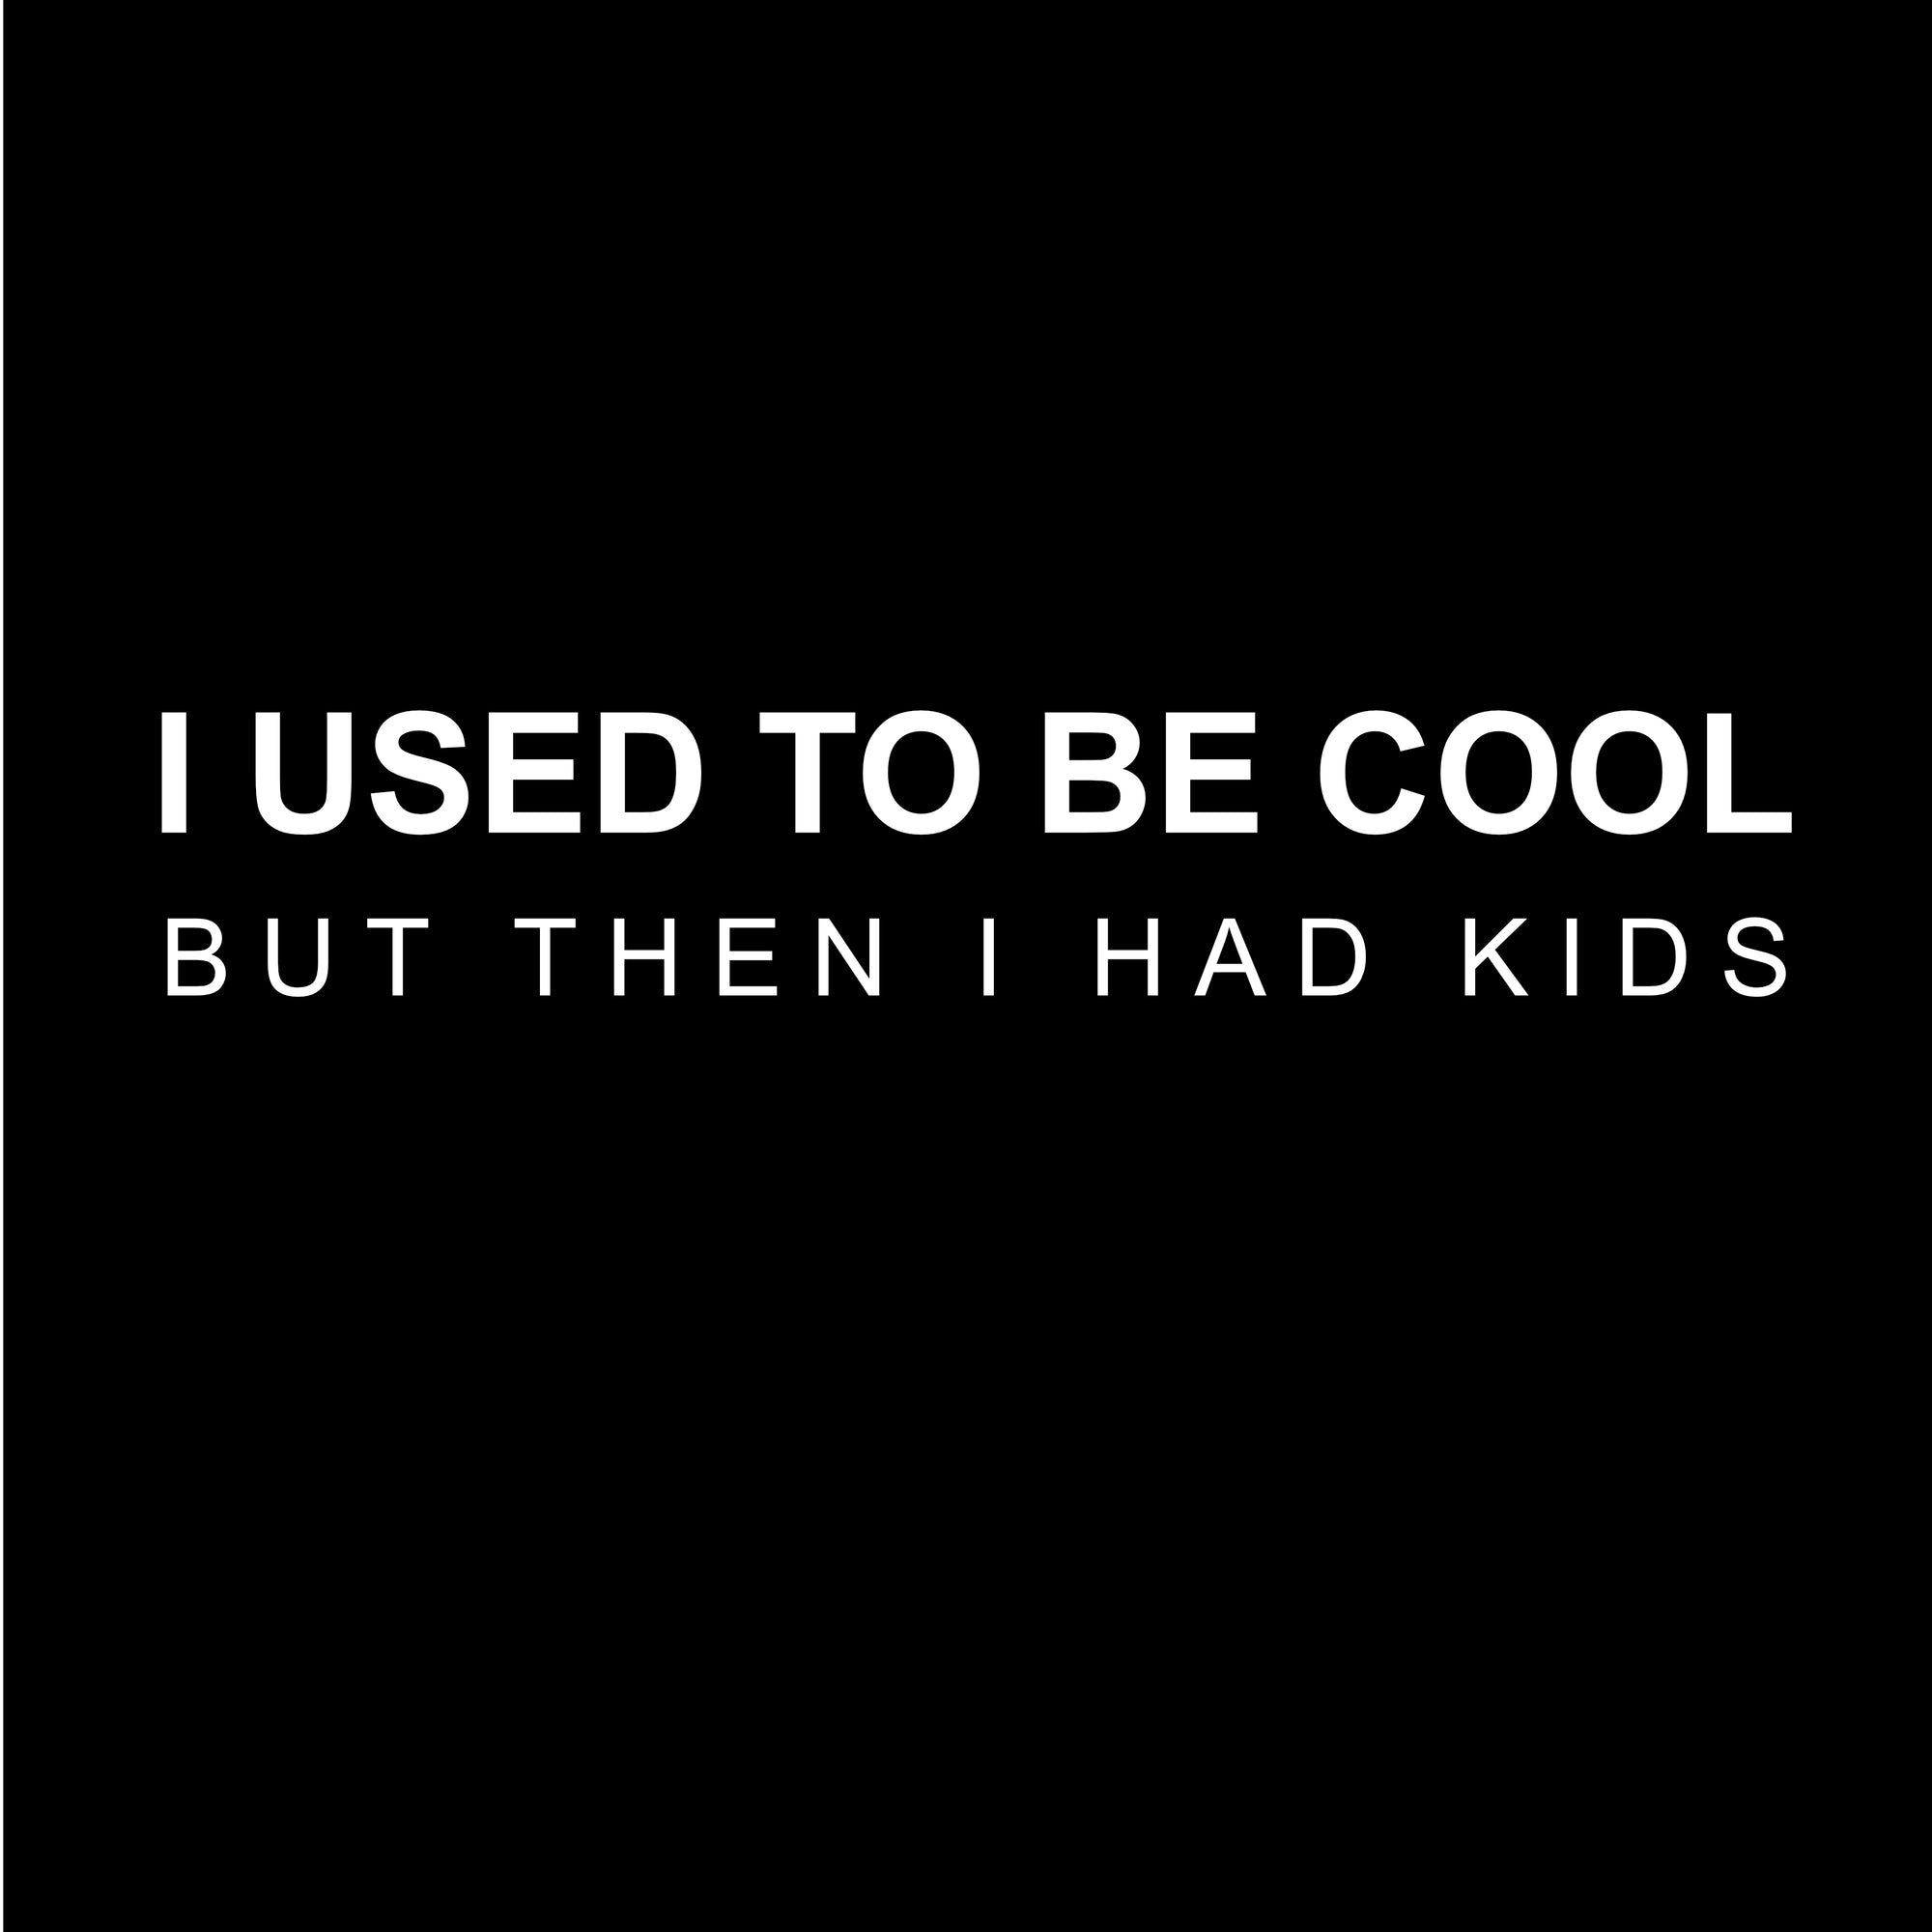 I used to be cool but then I had kids Printed T-Shirt-Black